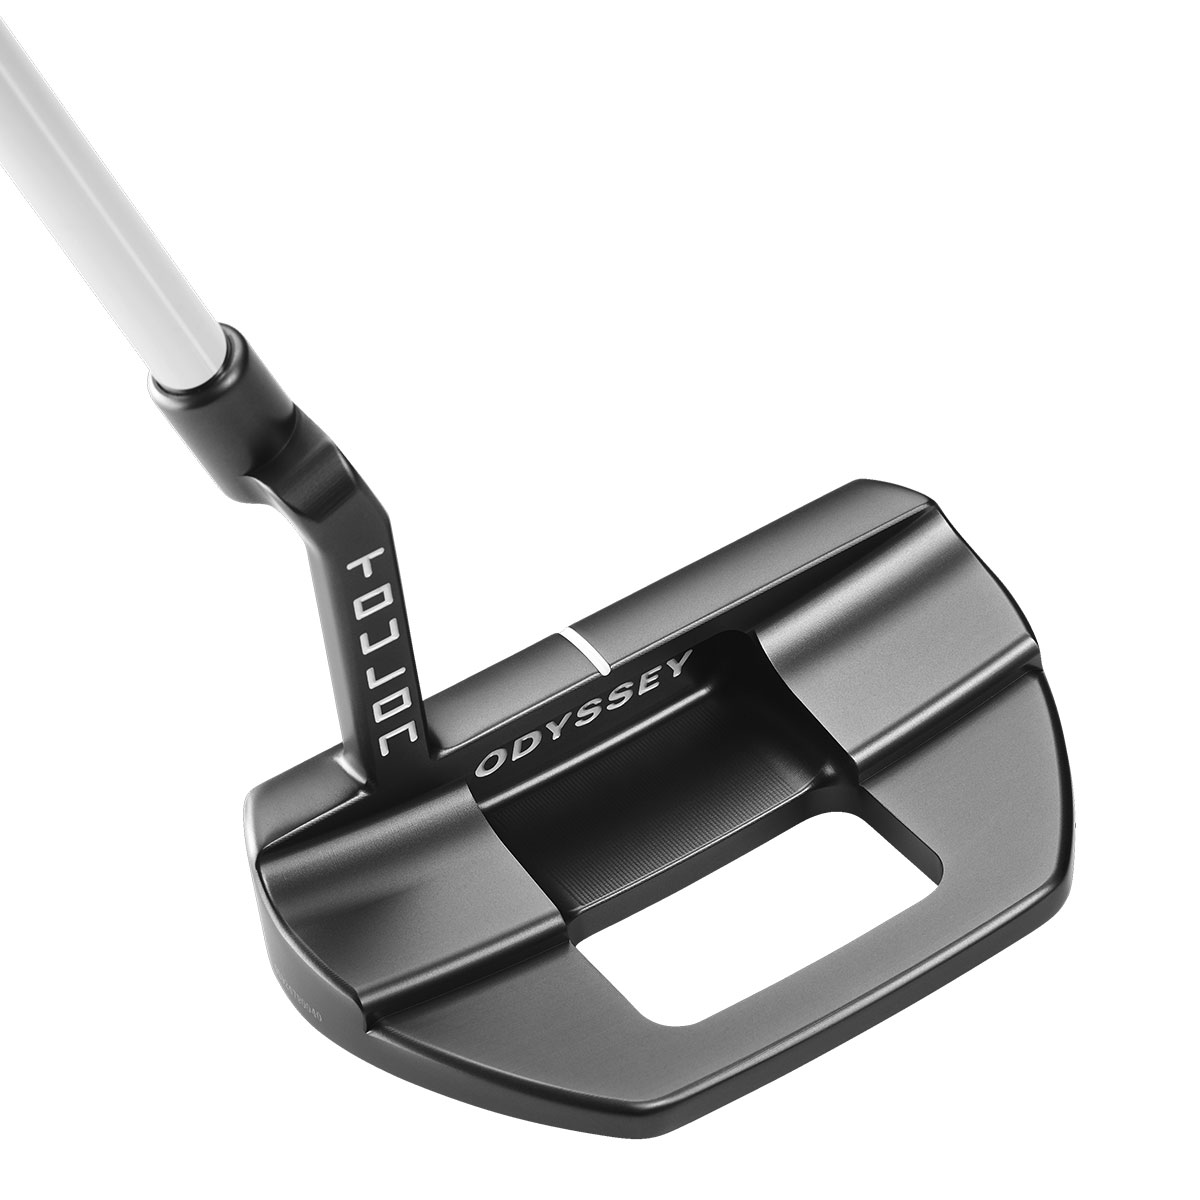 Odyssey Toulon Seattle Putter from american golf